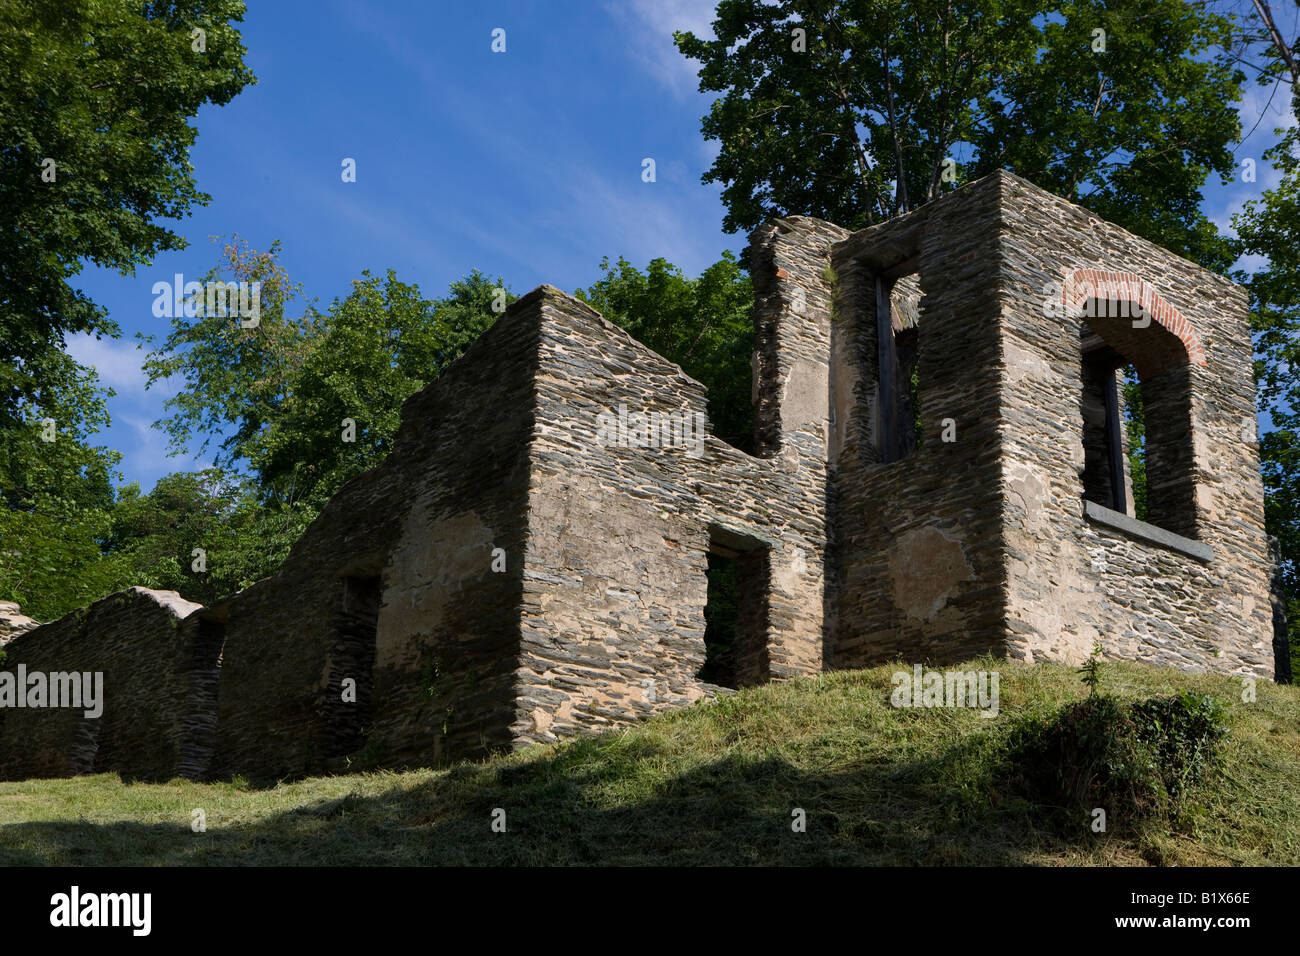 Ruins of St. John's Episcopal Church, Harpers Ferry National Historical Park, Harpers Ferry, West Virginia Stock Photo